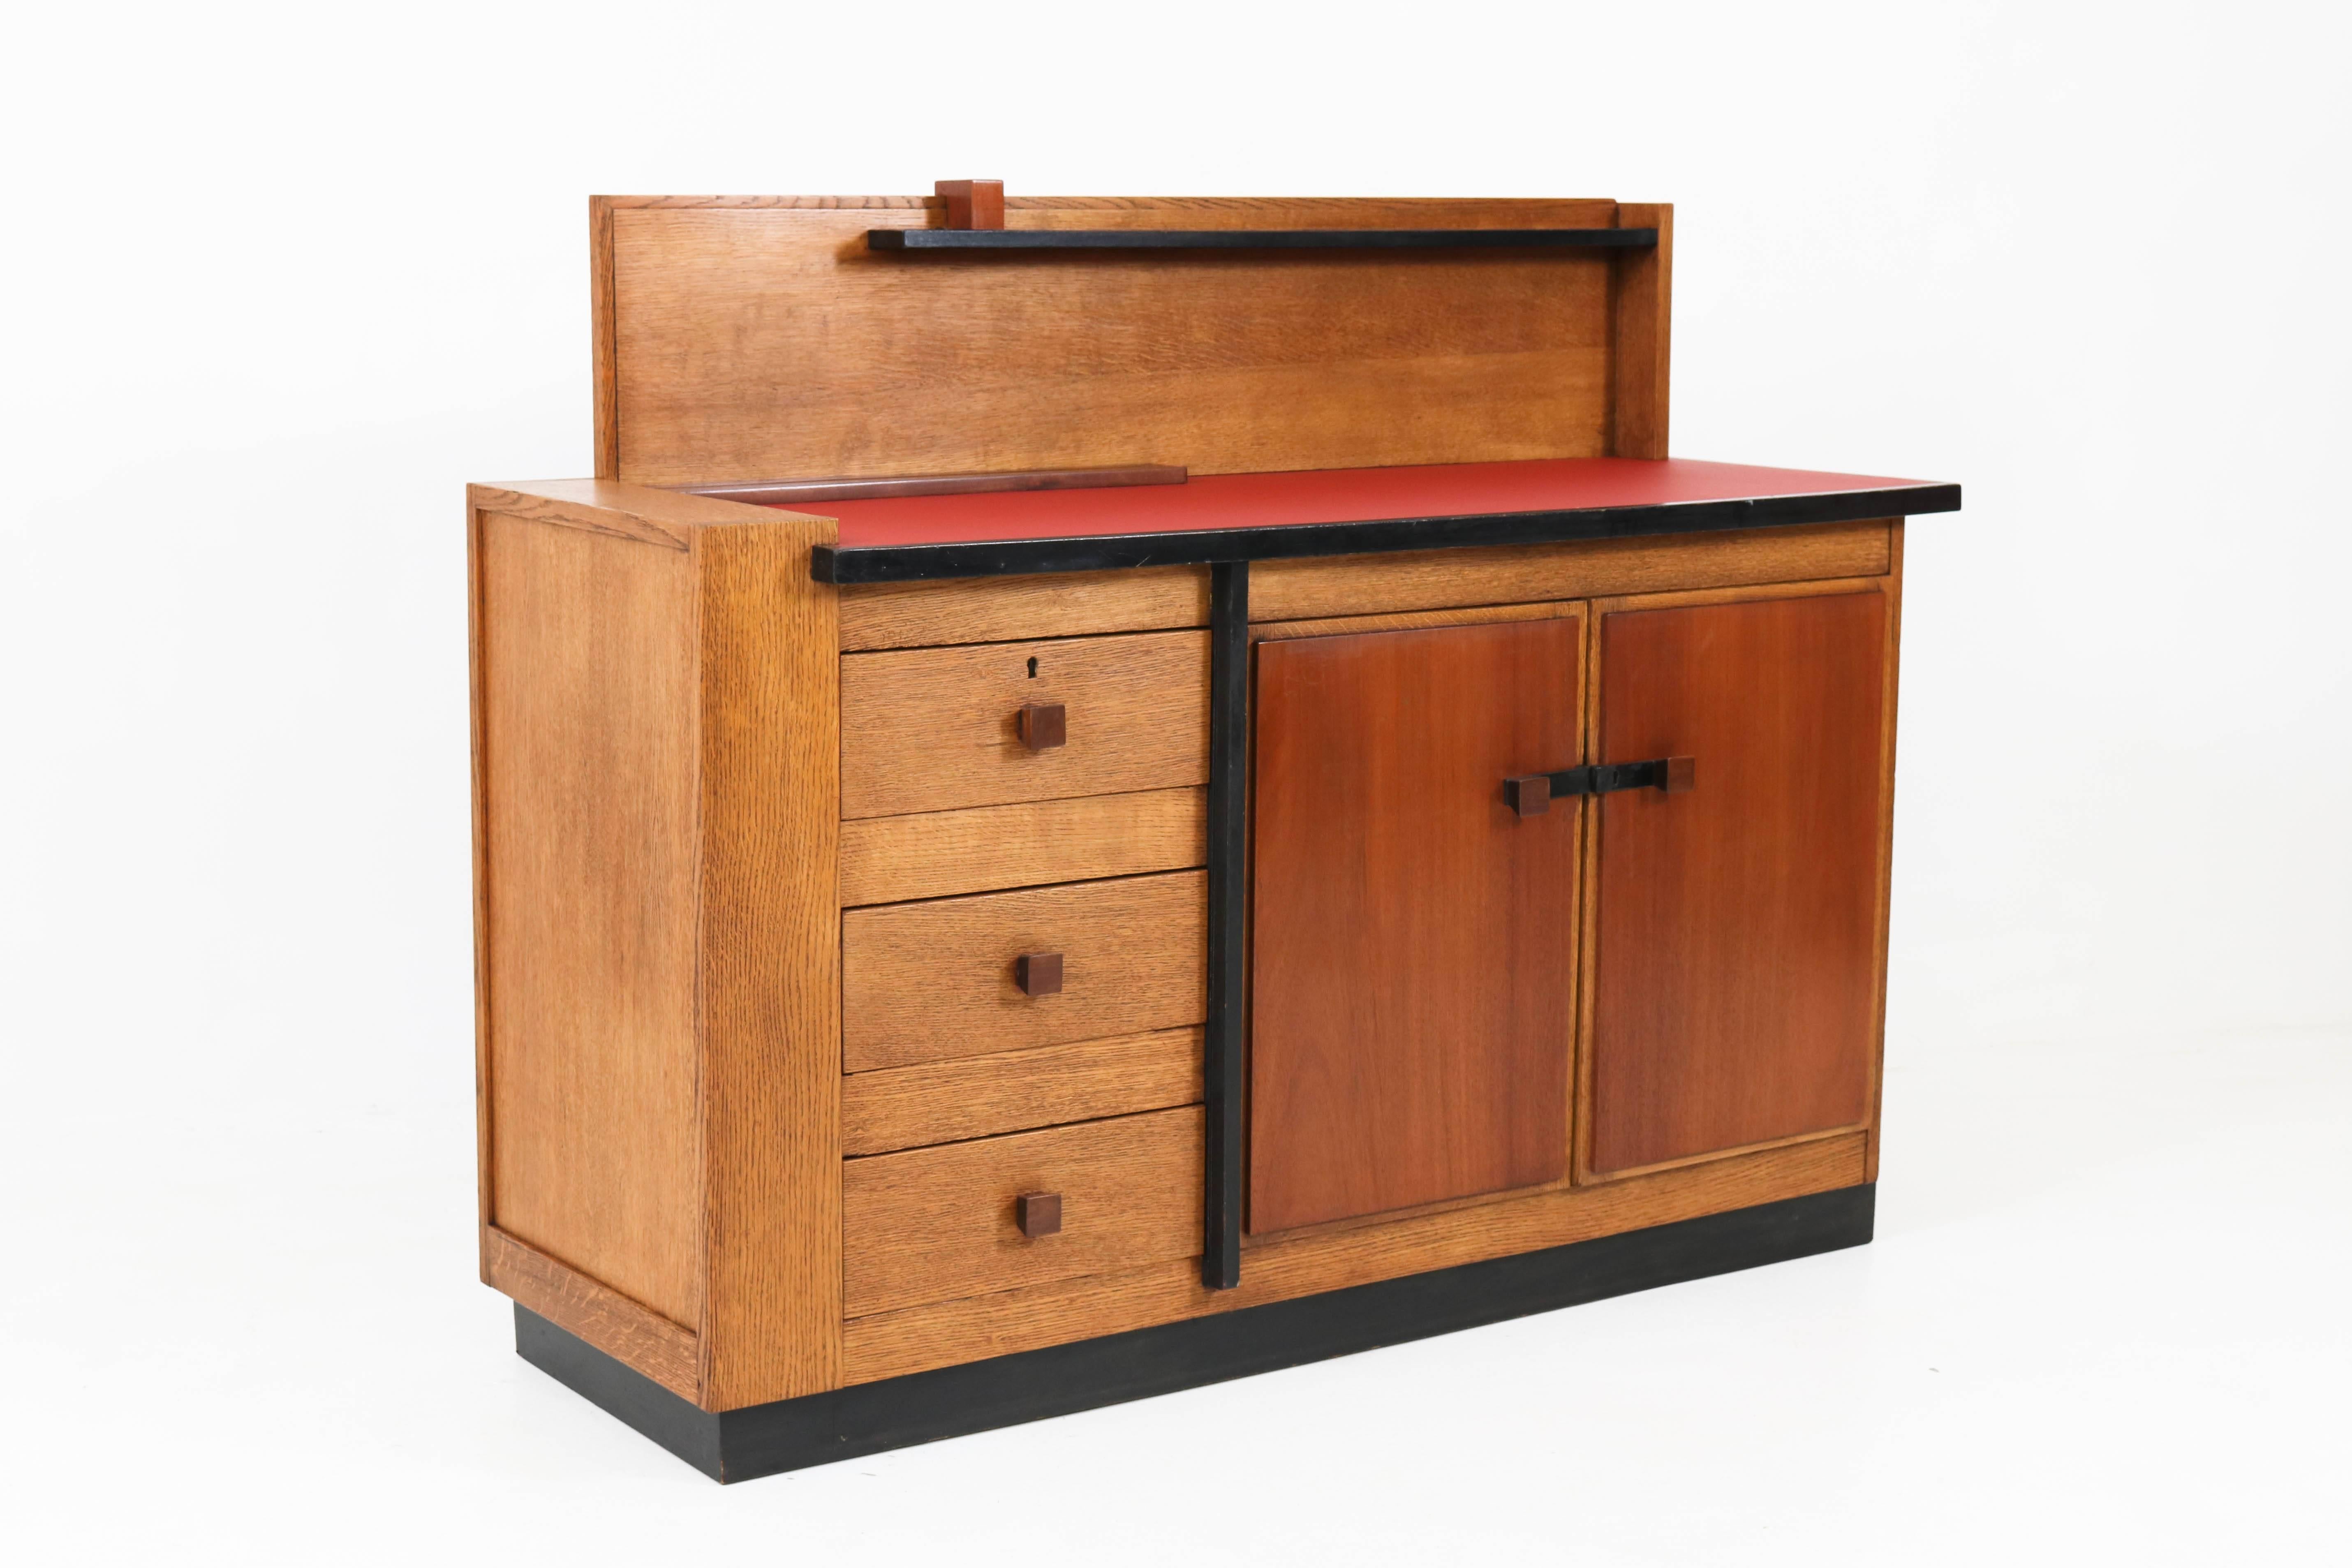 Magnificent and very rare Art Deco Haagse School sideboard or credenza by Jan Brunott, 1920s.
Solid oak with mahogany doors and handles on the three drawers.
The top has new red linoleum.
Original ebonized handles on the doors.
Striking design